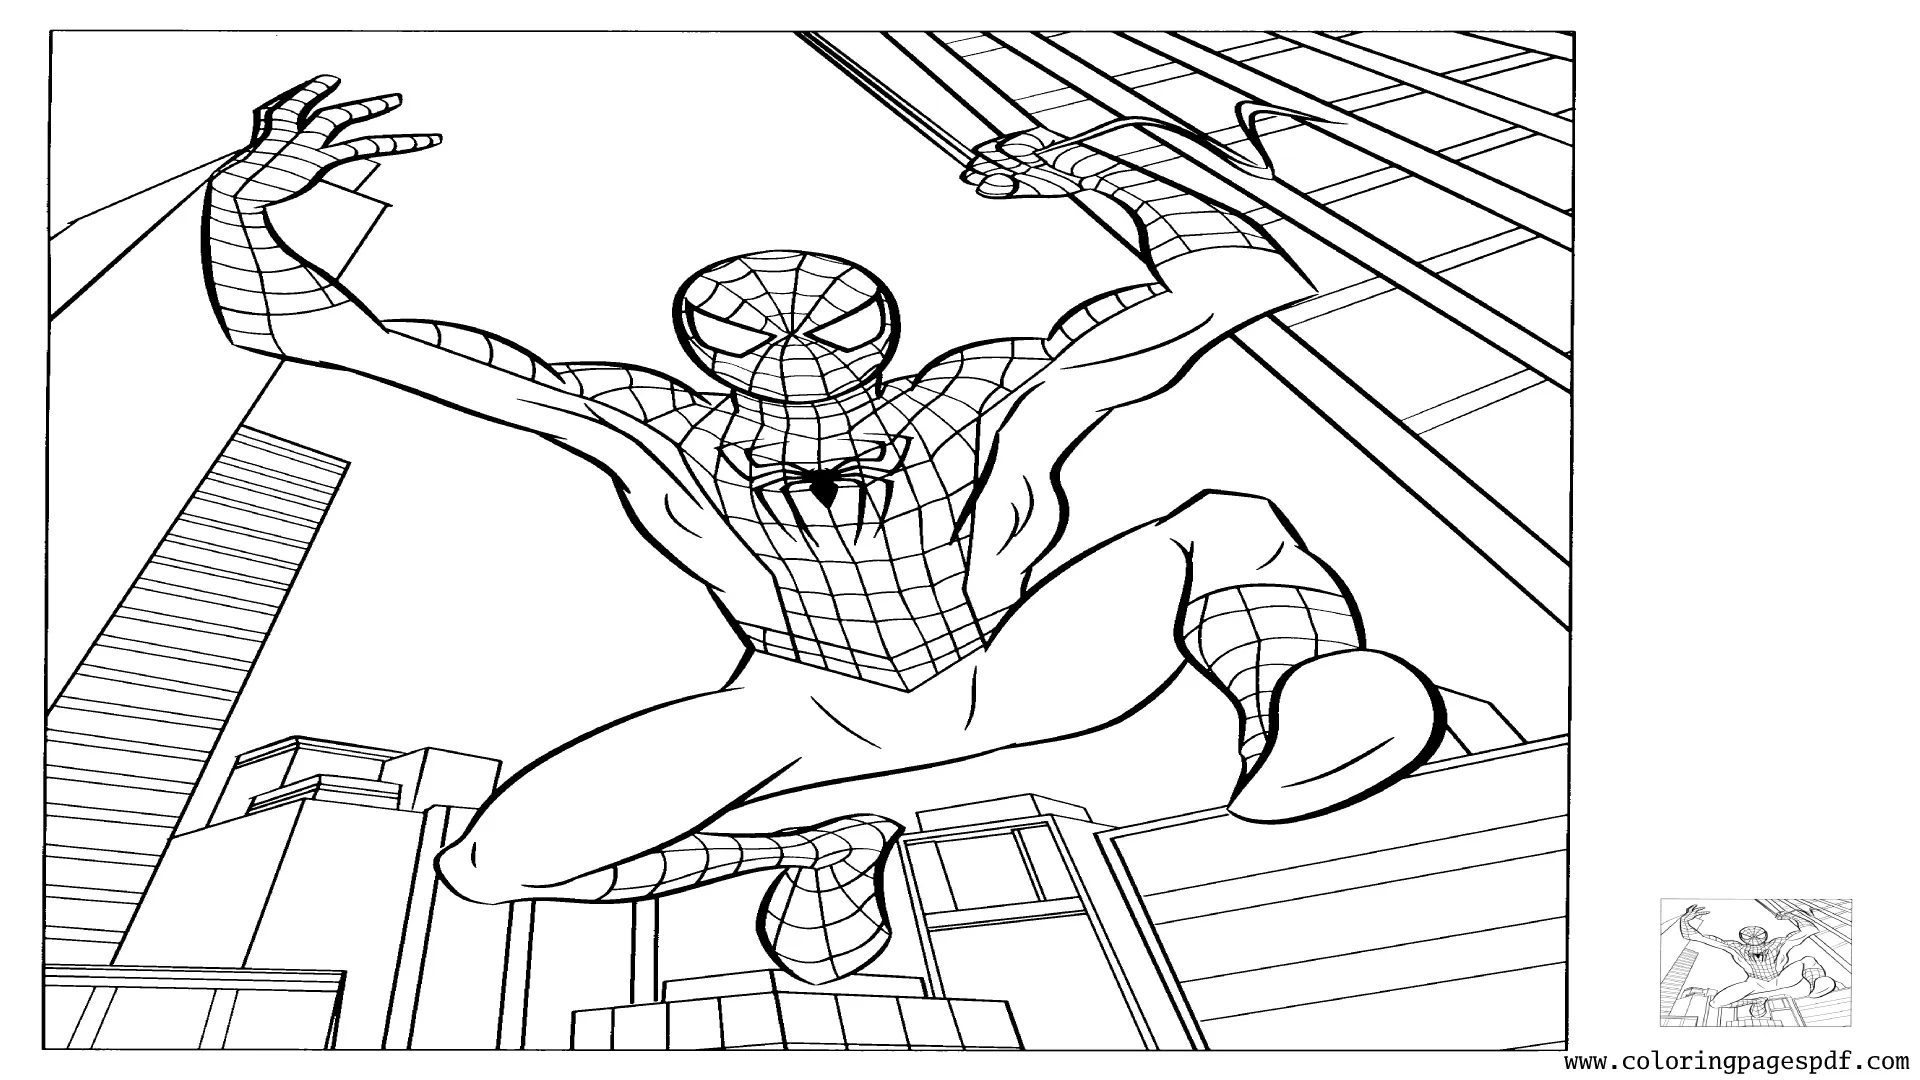 Coloring Page Of Spiderman Swinging With Webs